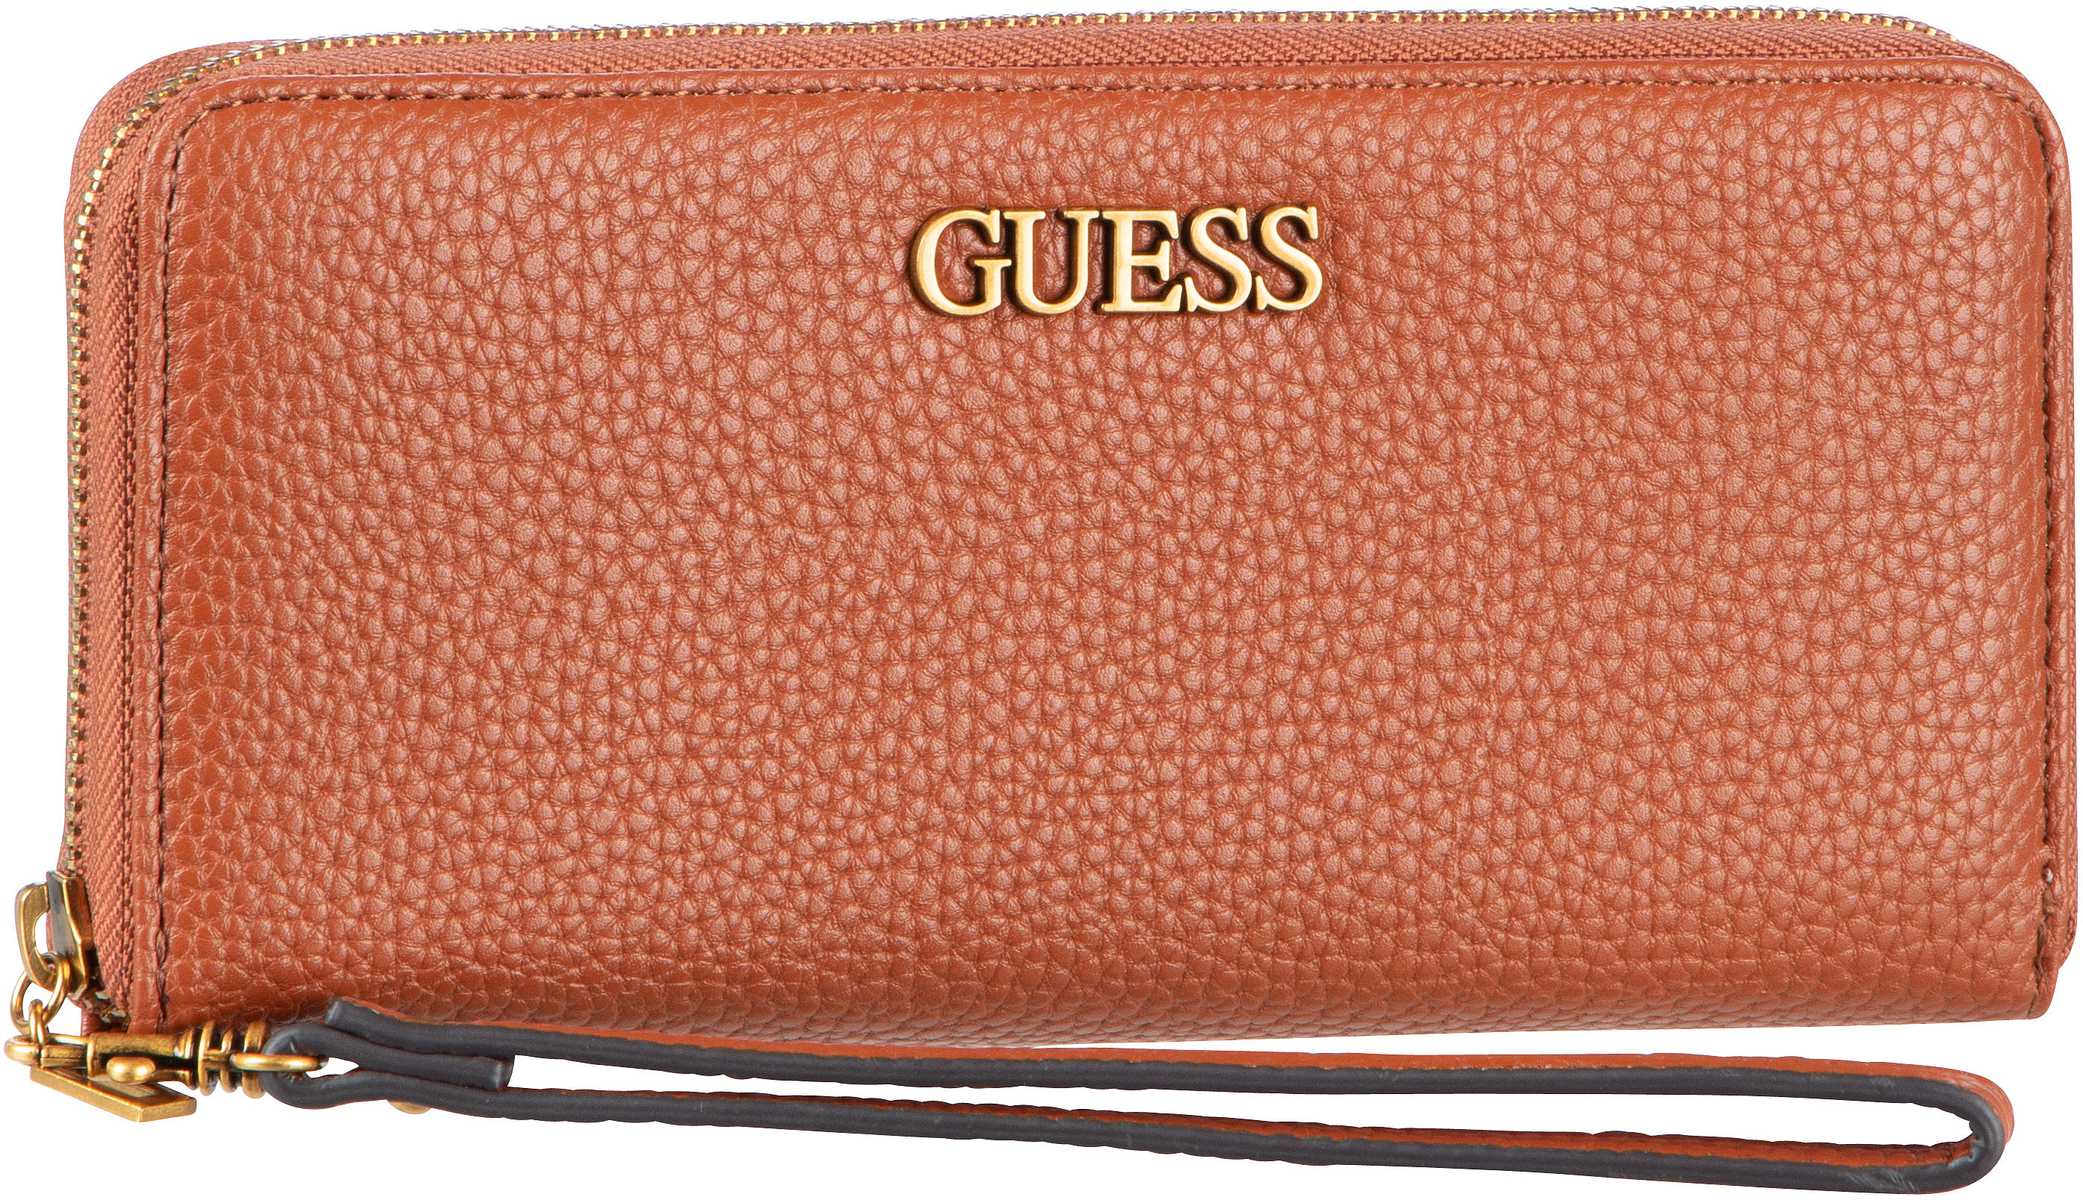 Guess Alby SLG Large Zip Around - Cognac